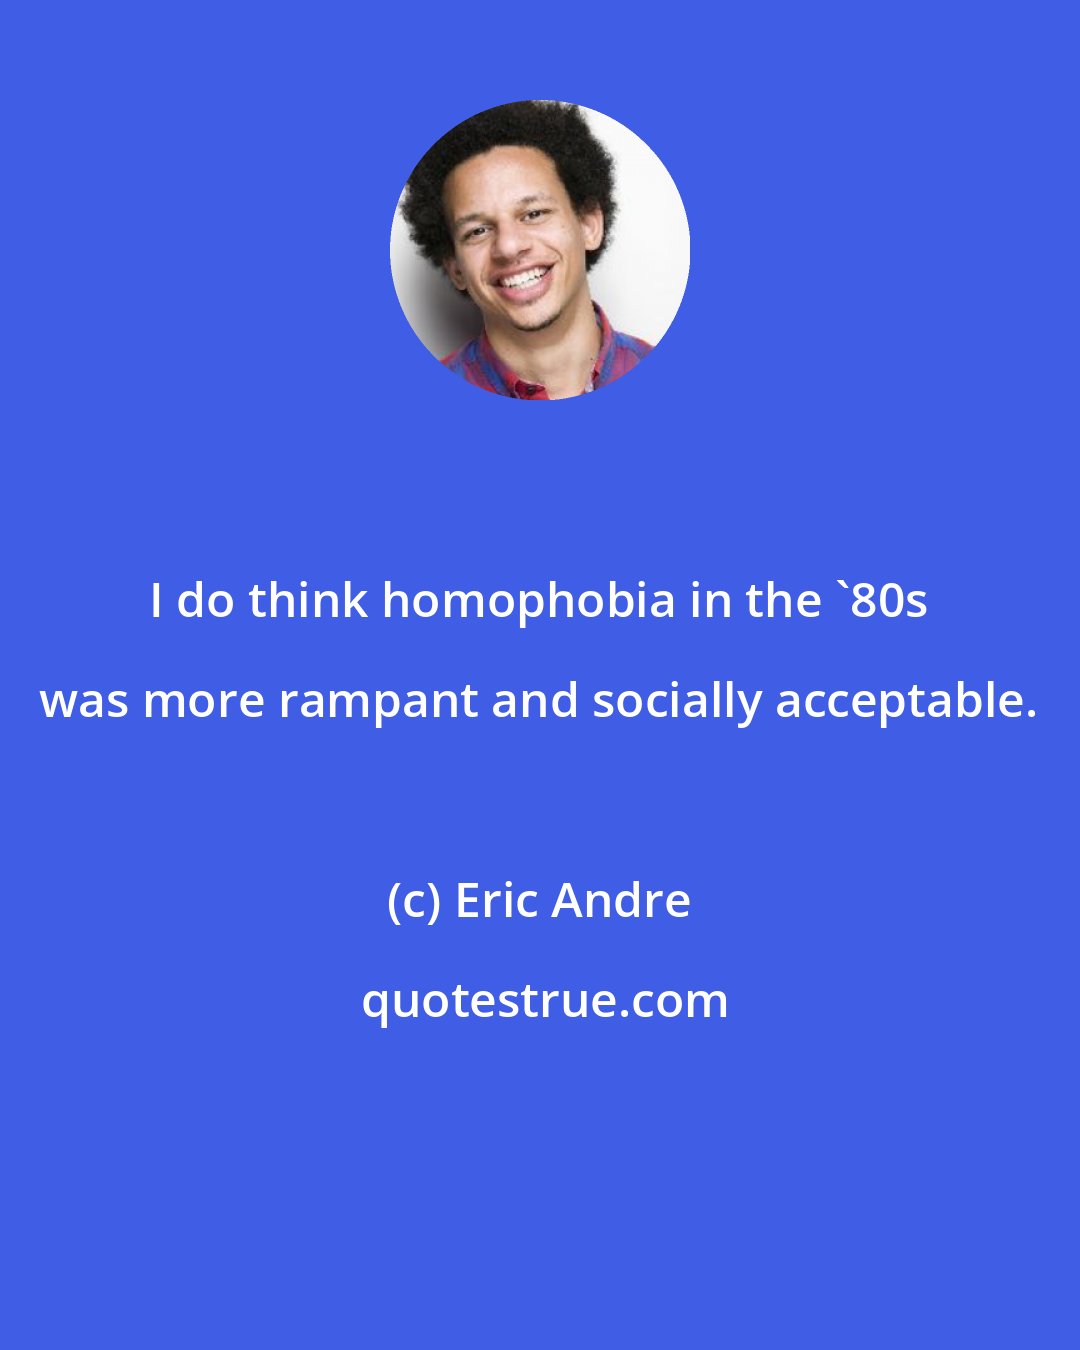 Eric Andre: I do think homophobia in the '80s was more rampant and socially acceptable.